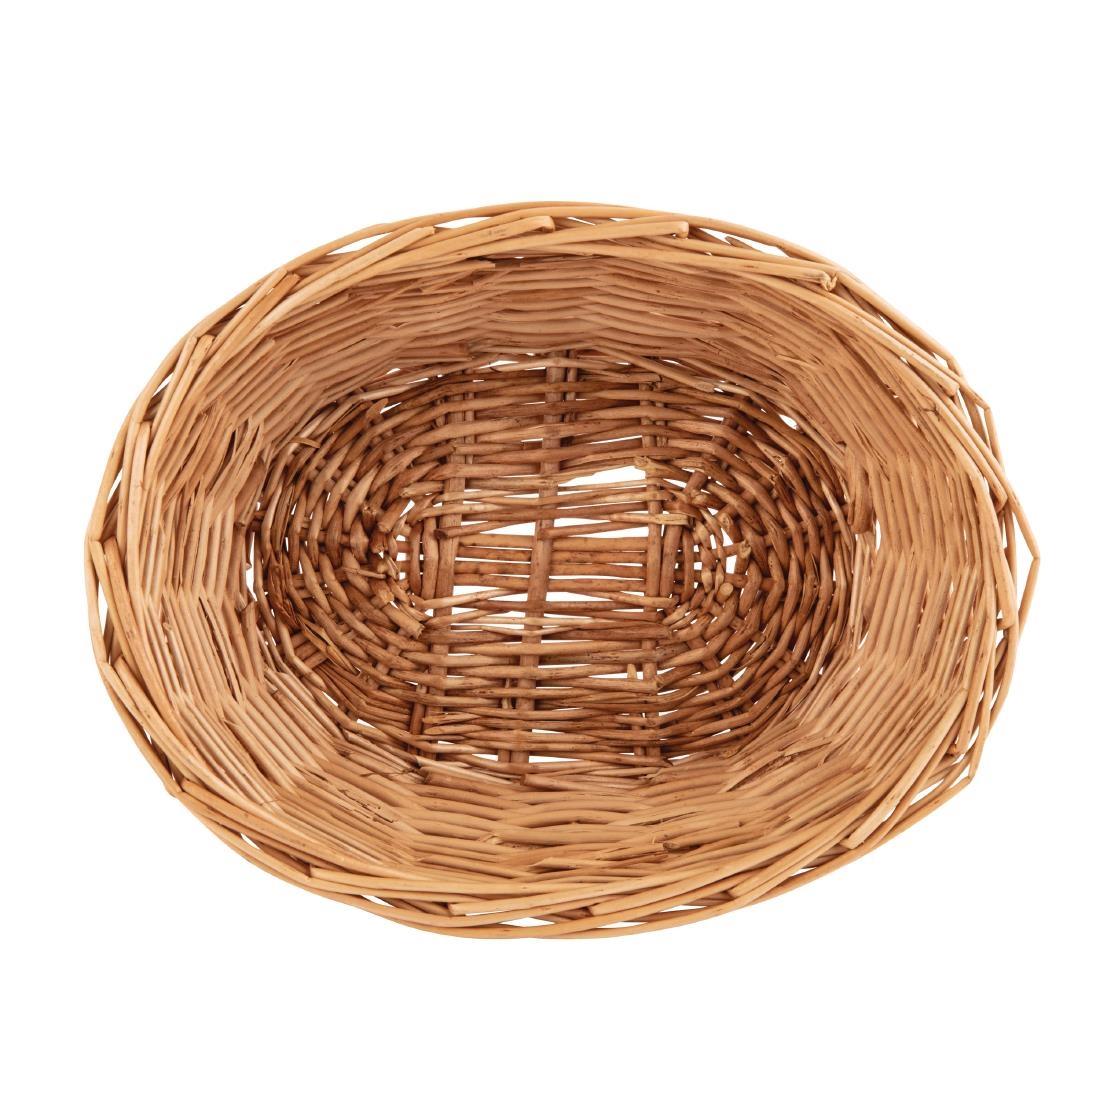 Willow Oval Basket - P764  - 3